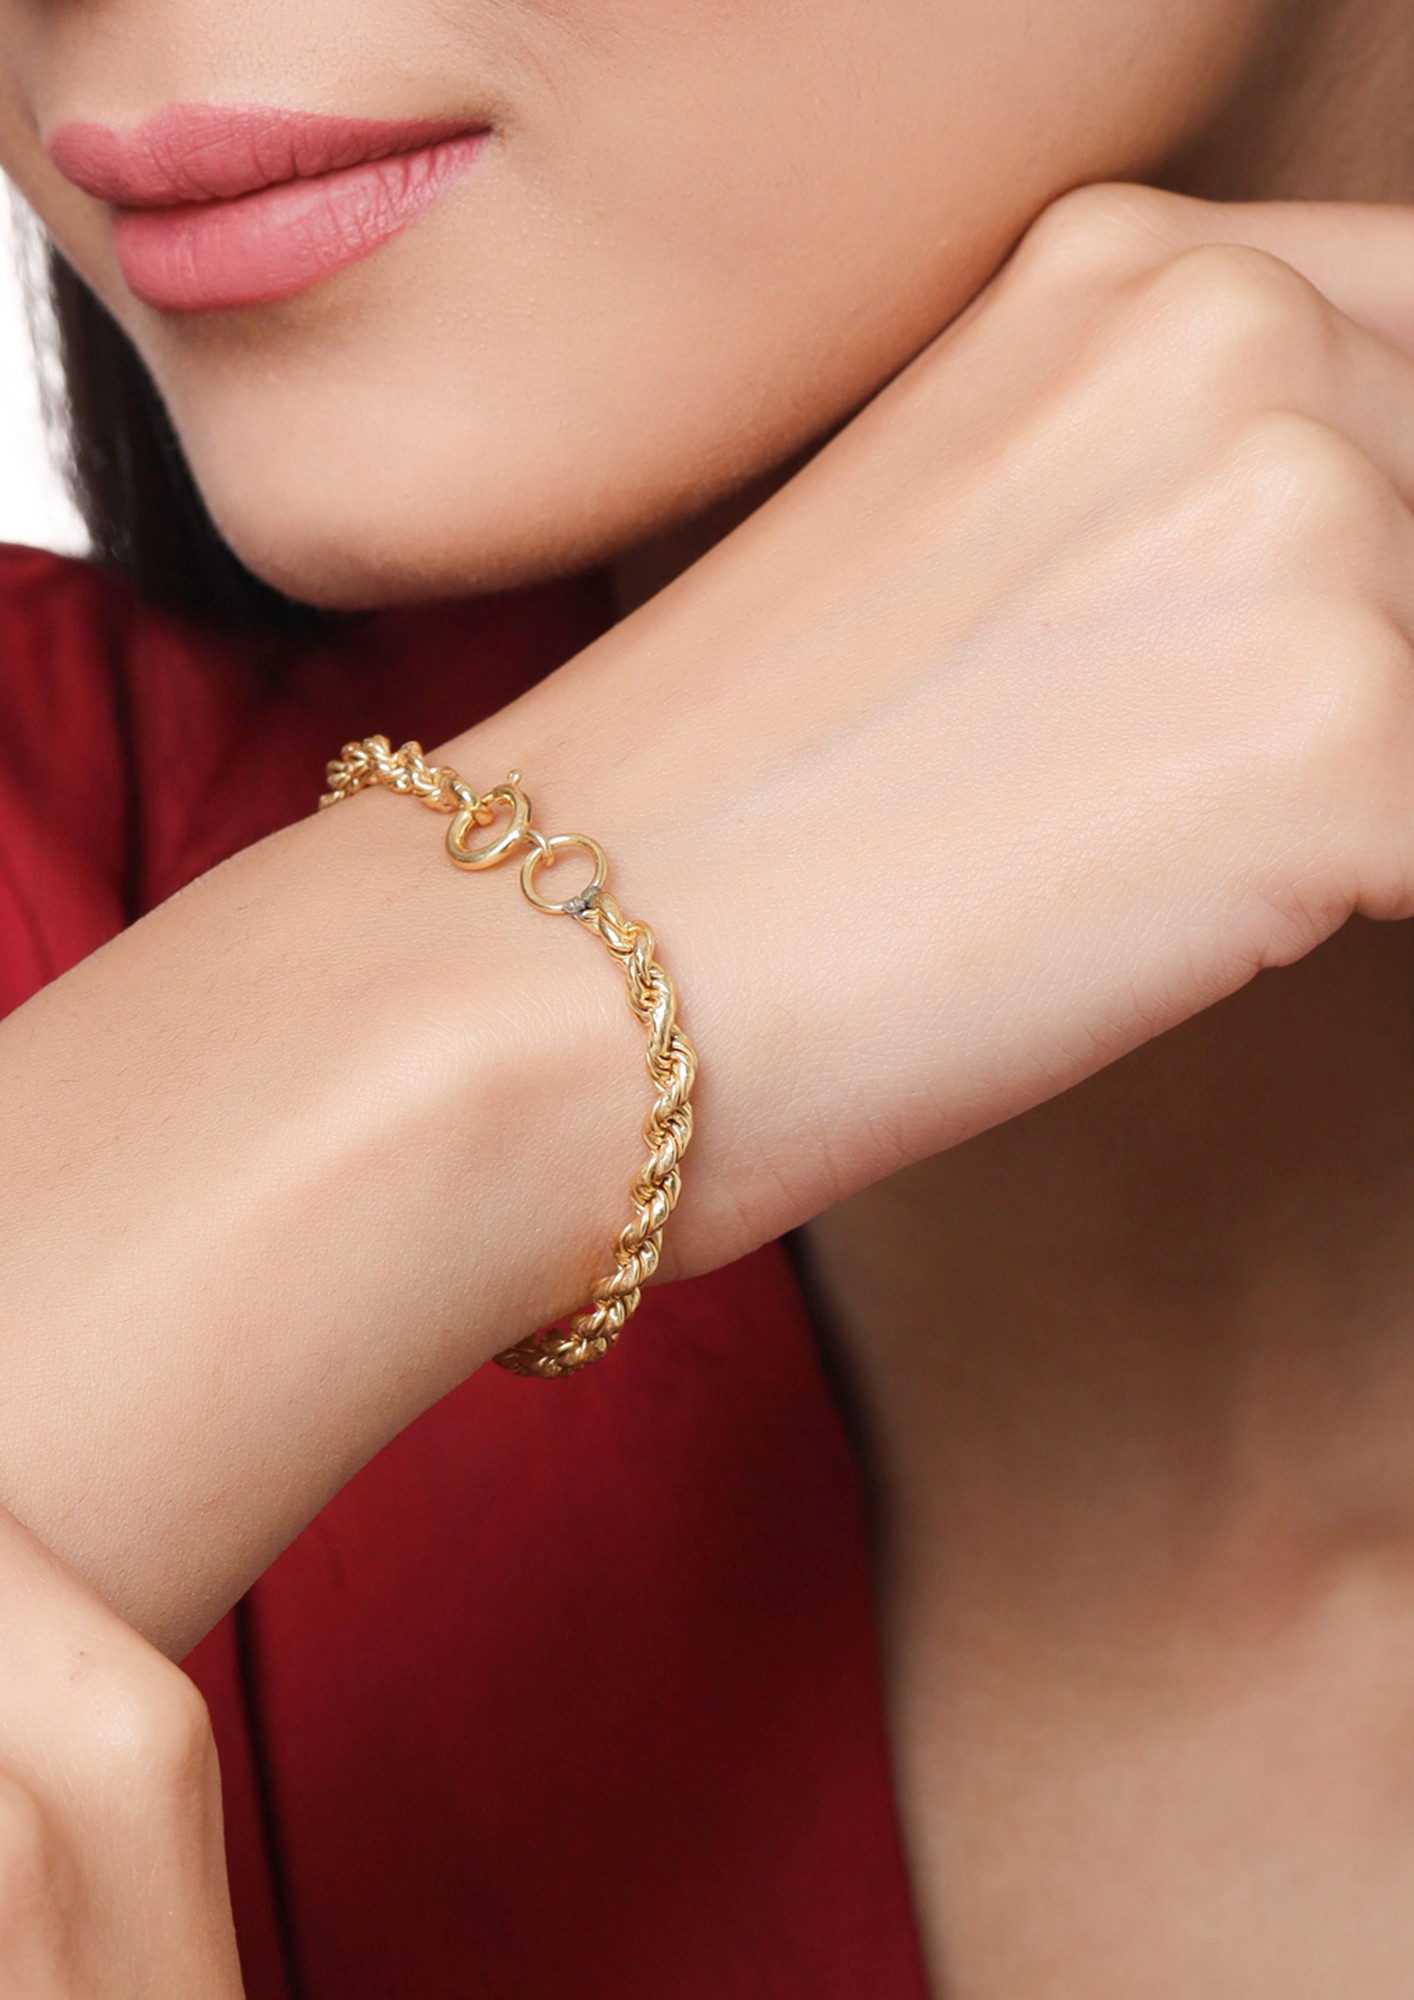 Reveal more than 144 gold chain bracelet womens super hot